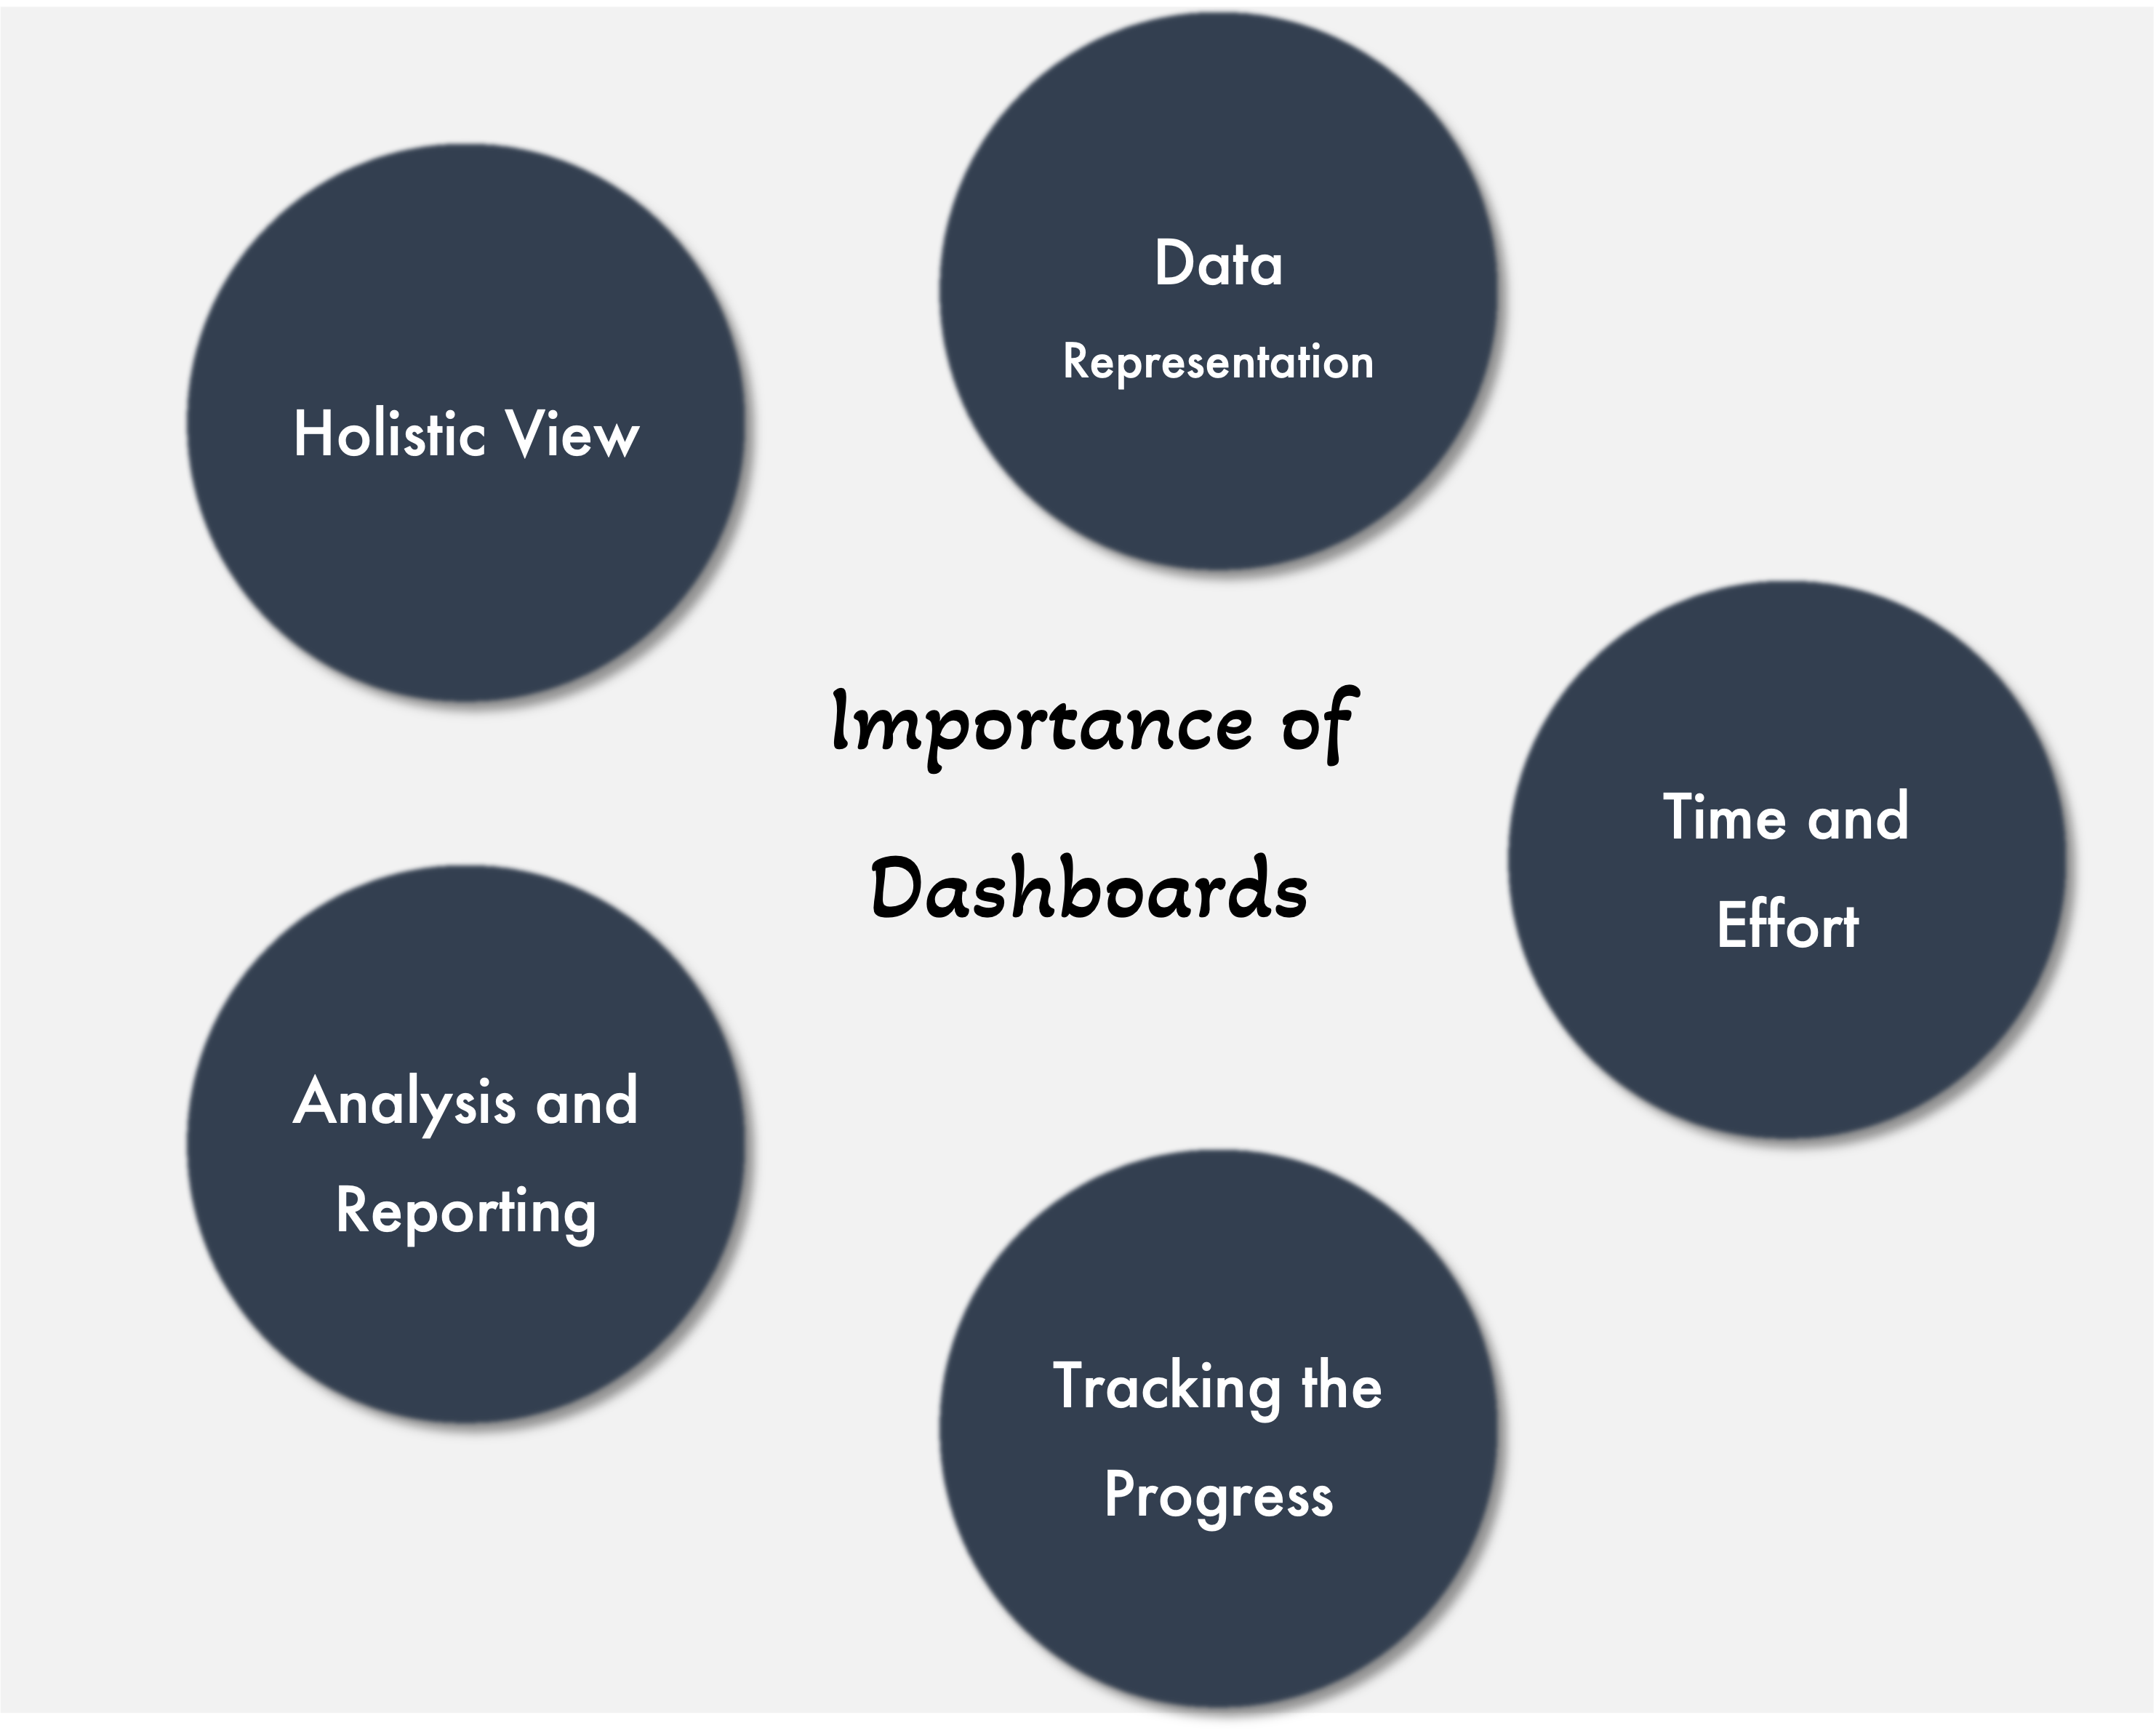 The Importance of Dashboards